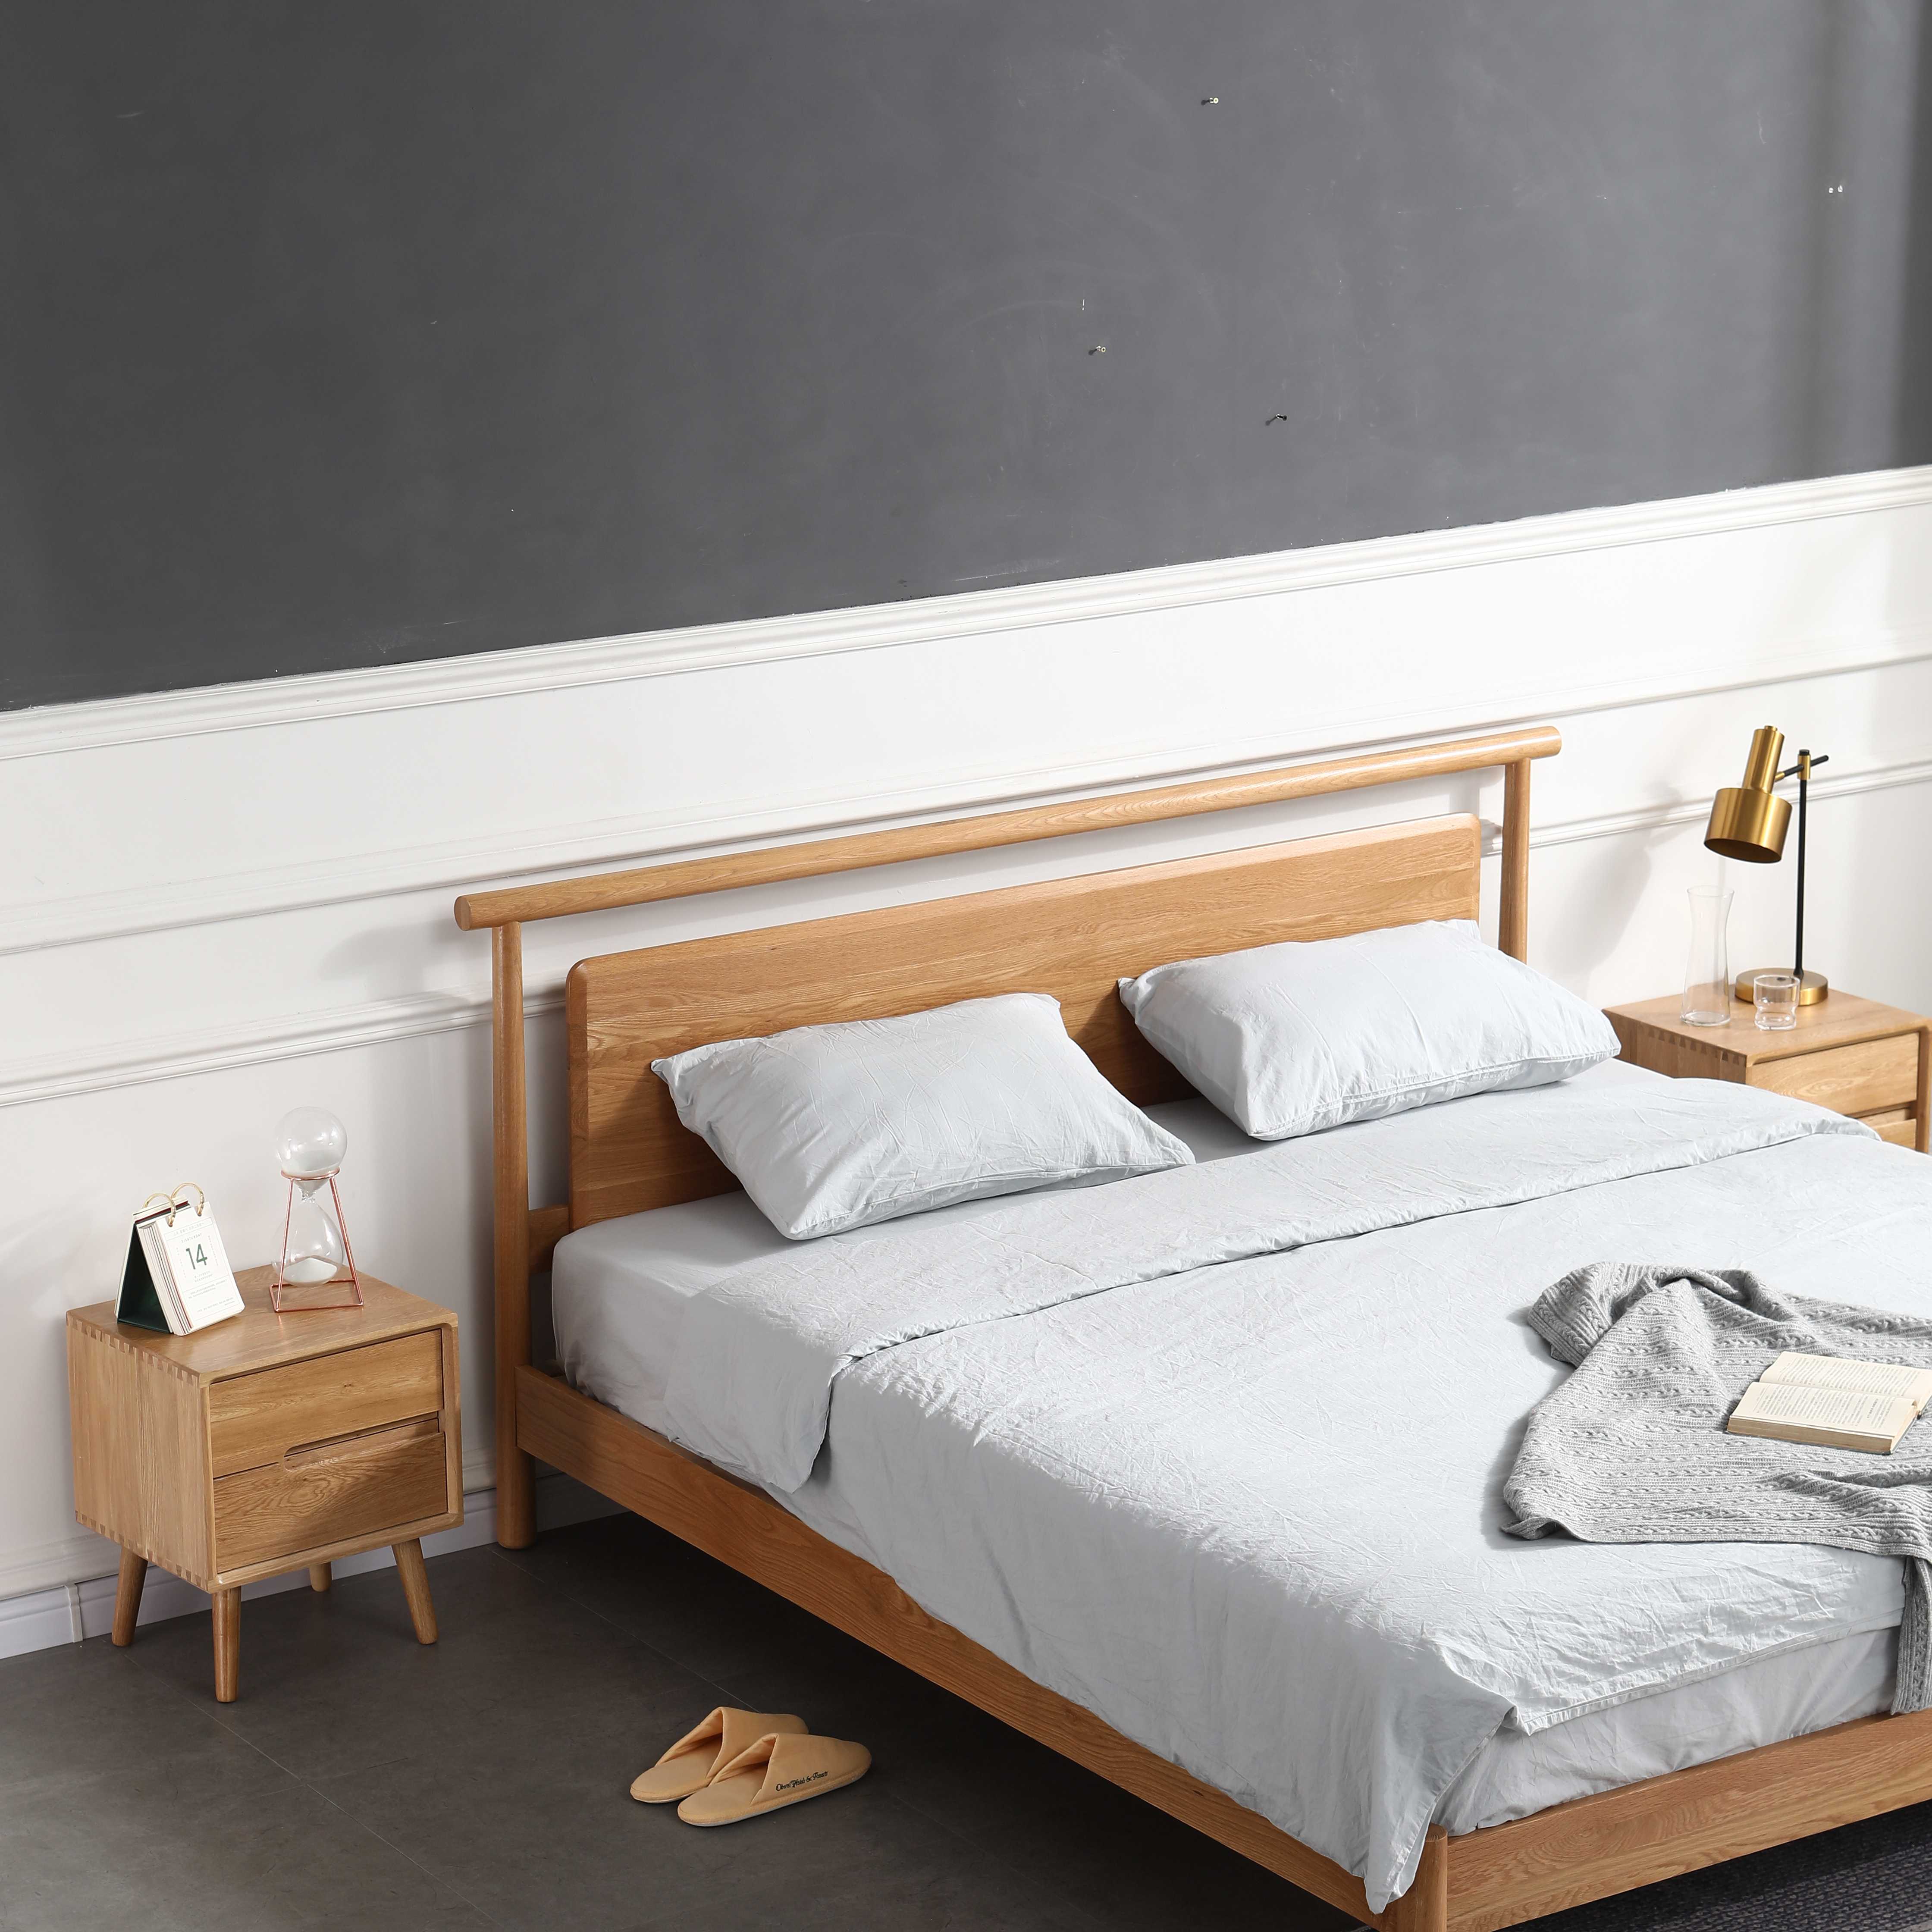 bed wood bed oak bed oak wood bed white oak bed beech bed beech wood bed birch bed birch wood bed wooden bed solid wood bed office bed indoor bed study bed original design bed furniture factory restaurant bed hotel bed big bed small bed adult bed